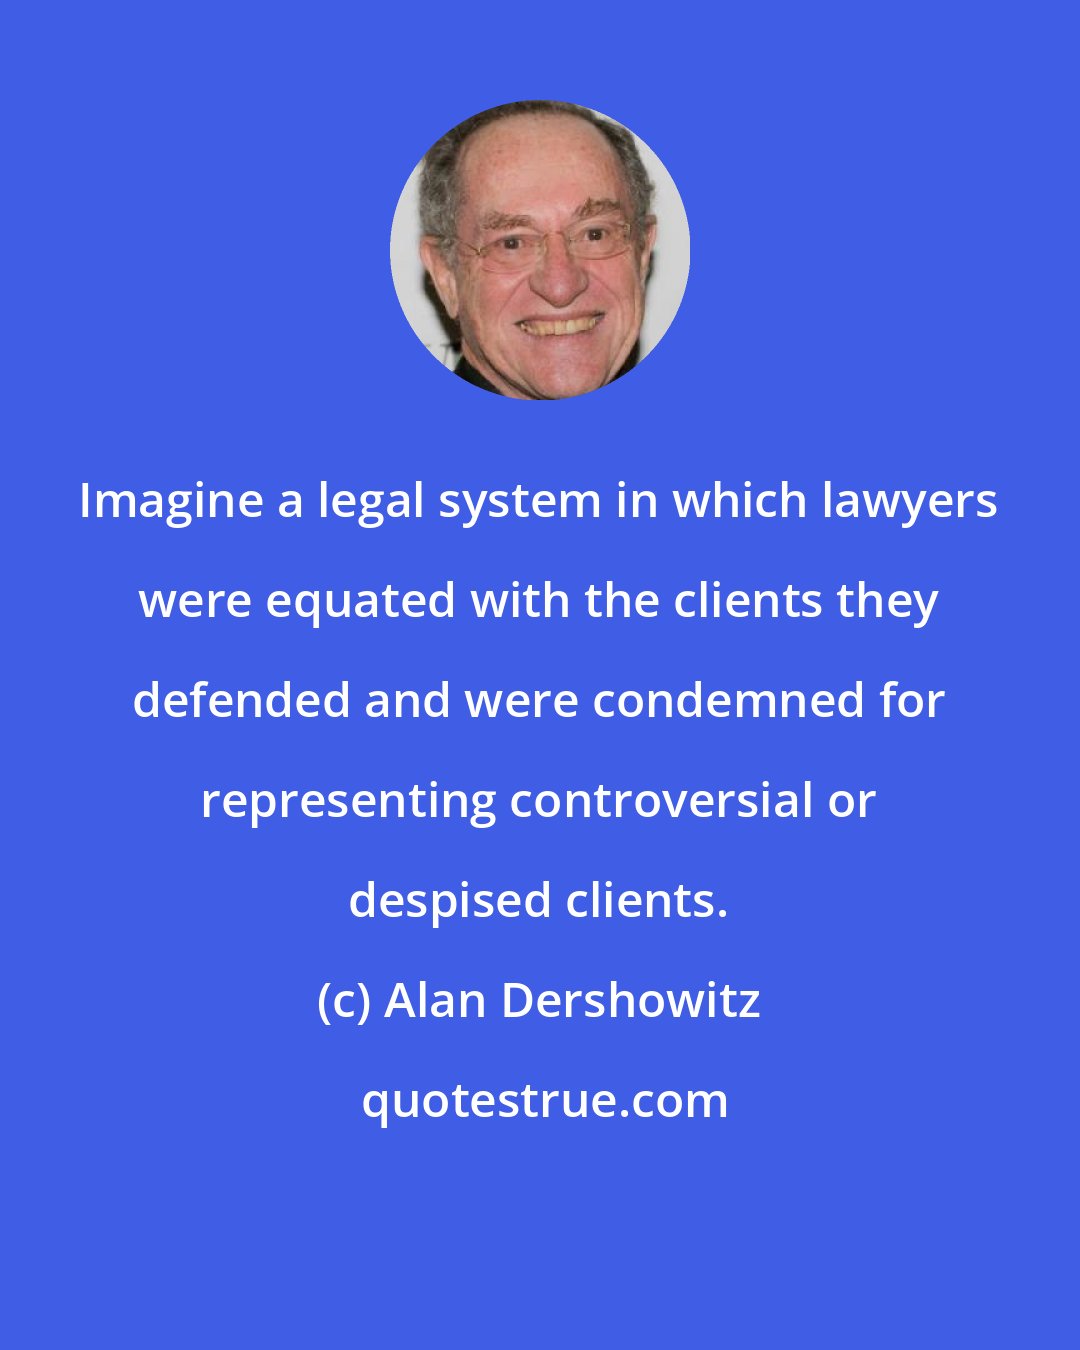 Alan Dershowitz: Imagine a legal system in which lawyers were equated with the clients they defended and were condemned for representing controversial or despised clients.